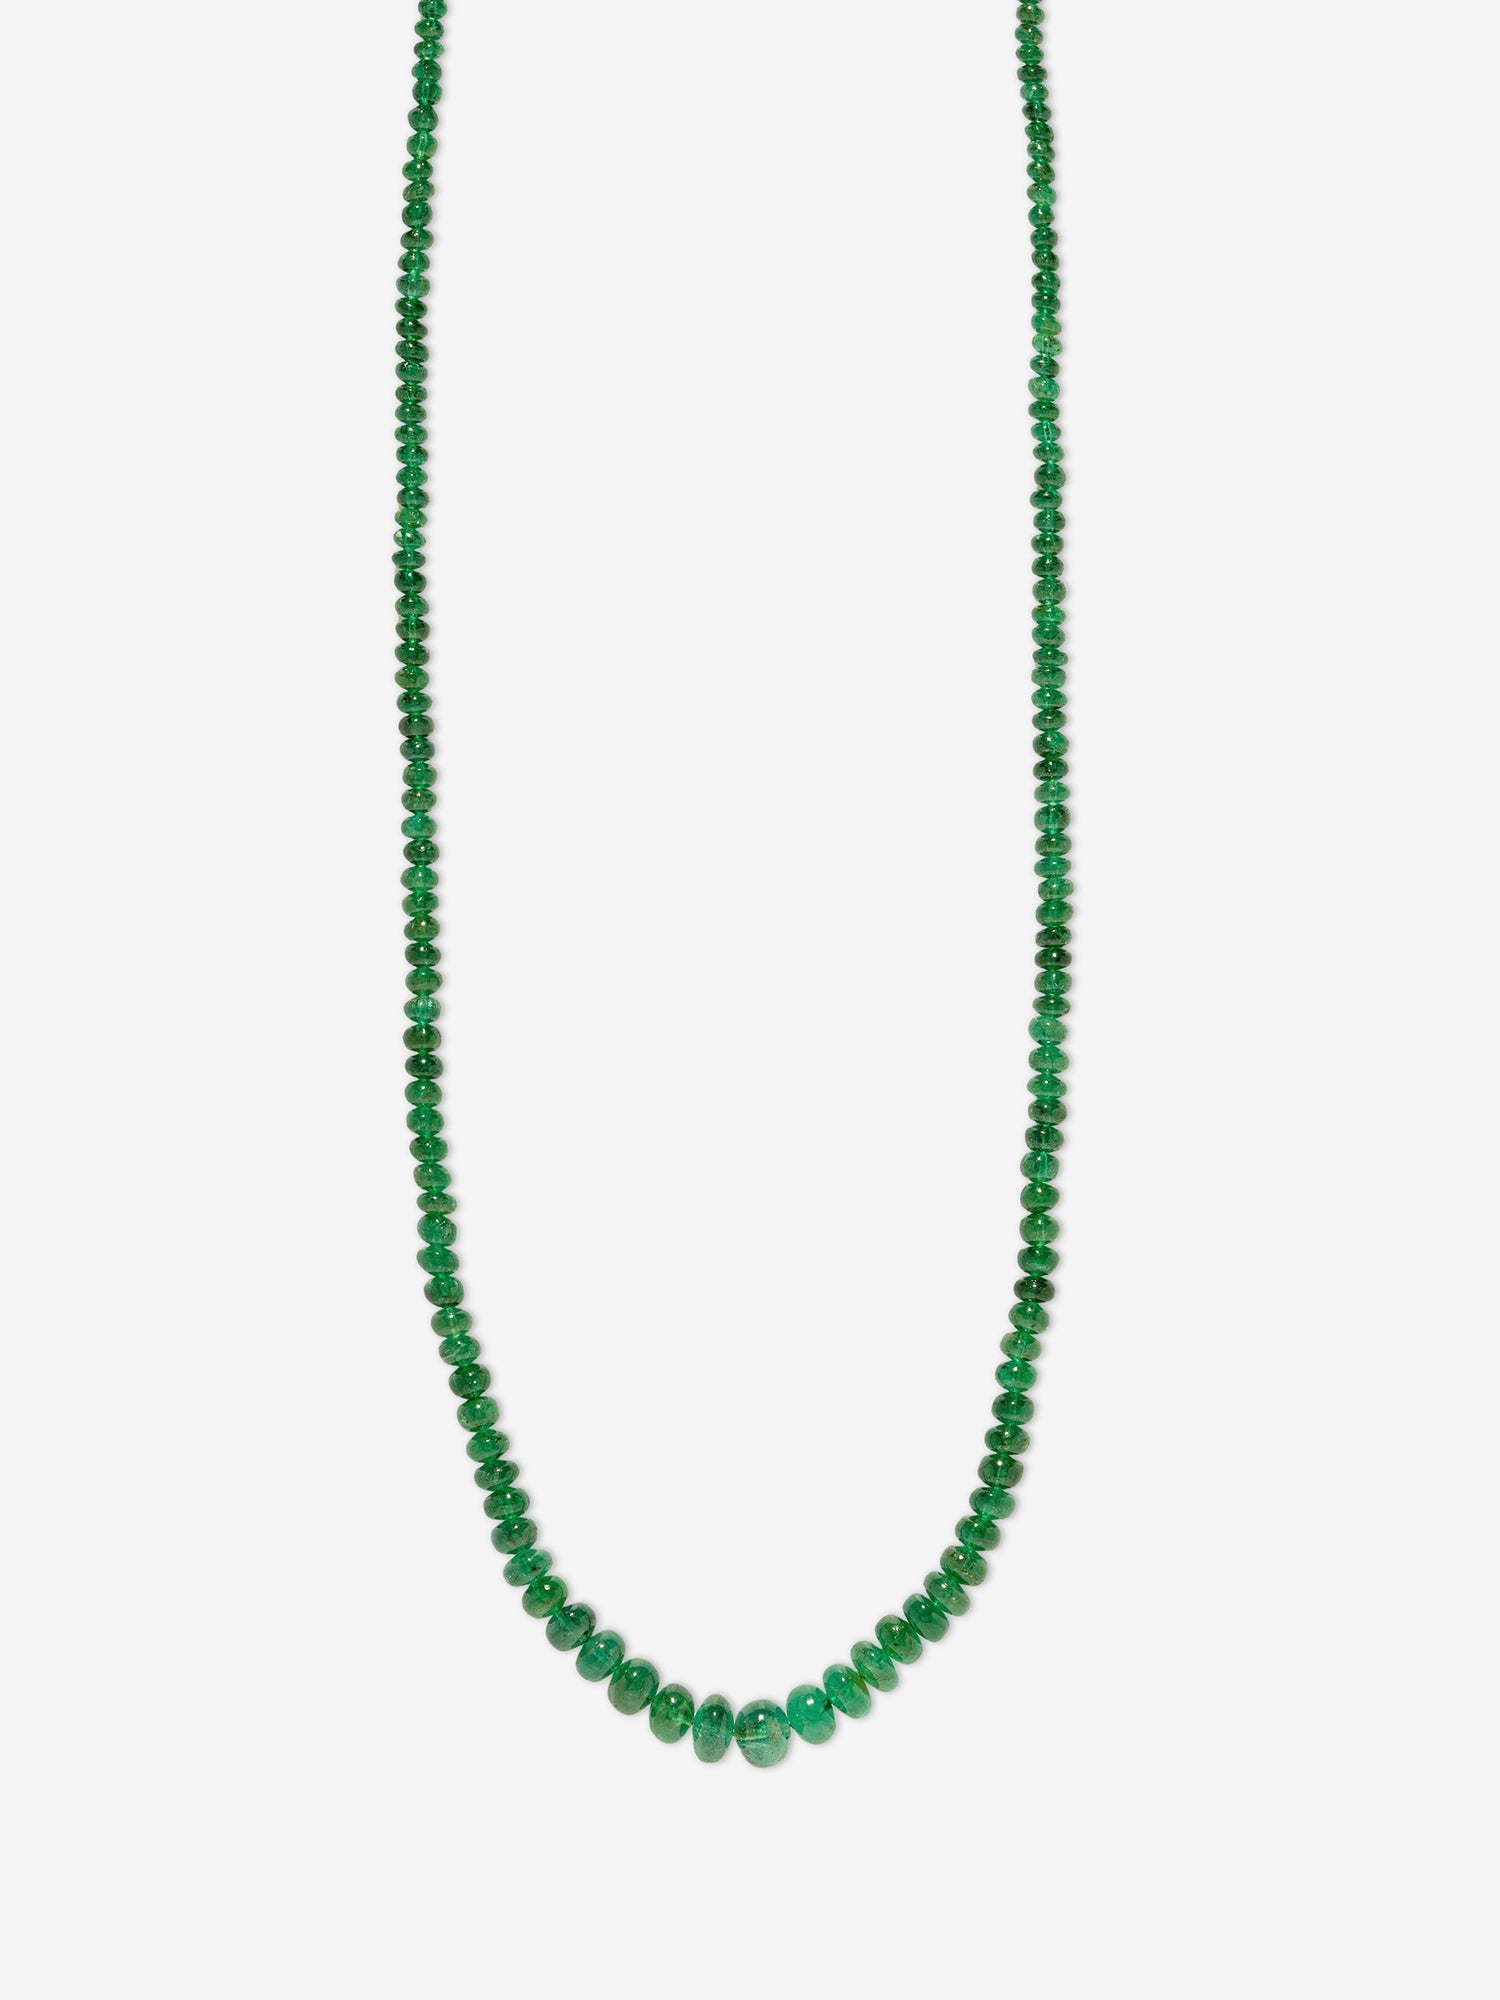 Rich Emerald Bead Necklace